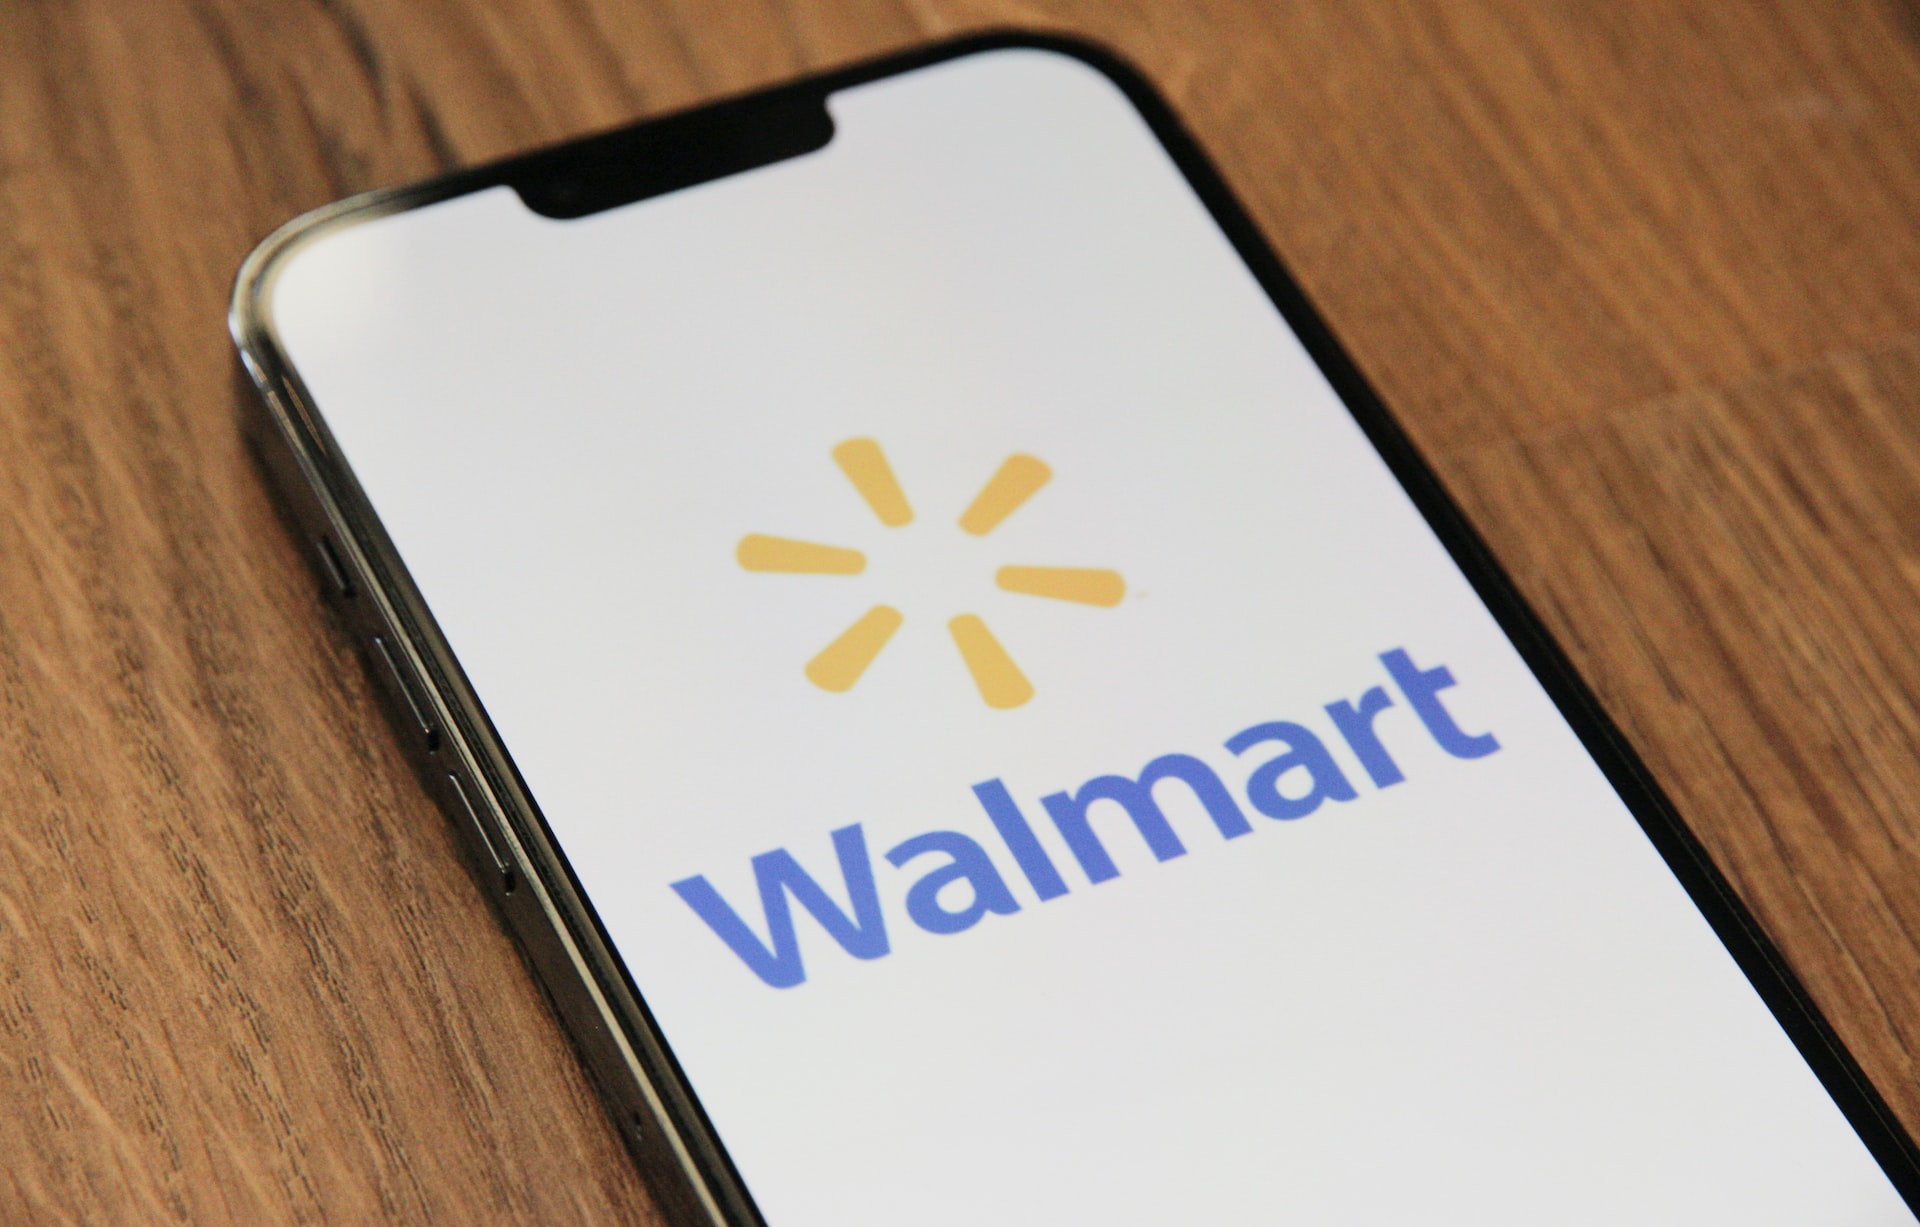 Walmart Connection Center: What You Need To Know